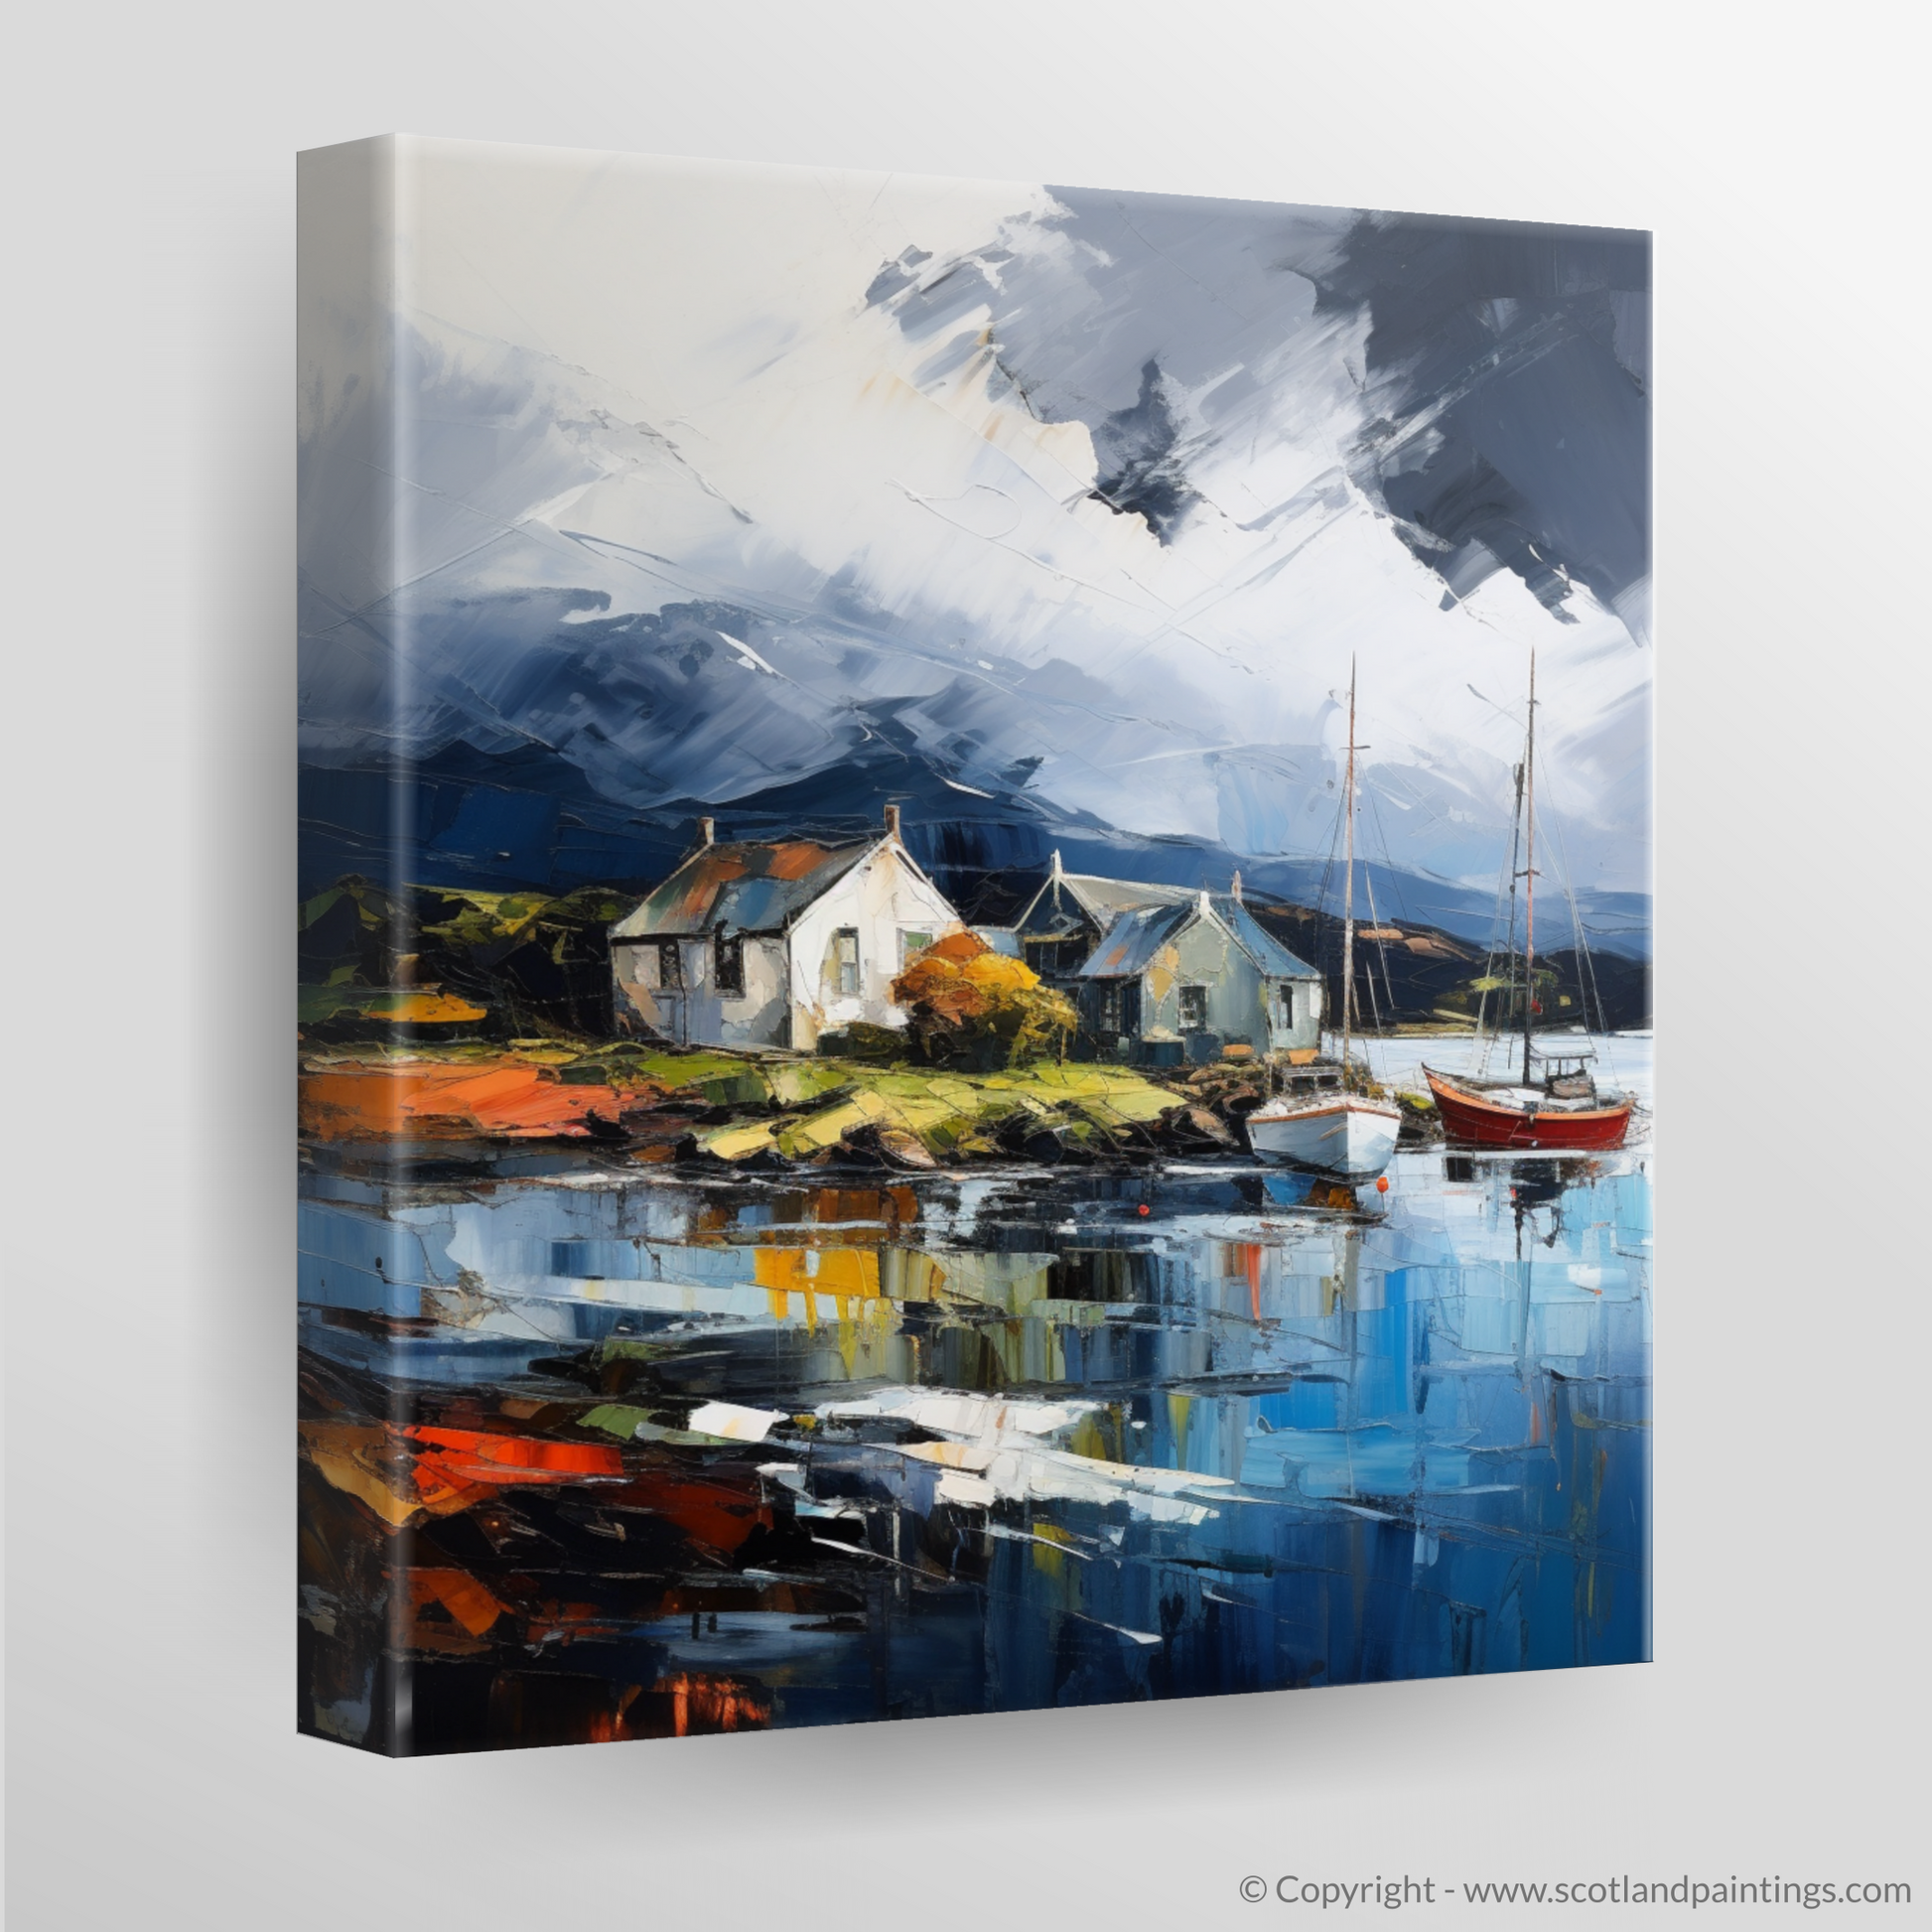 Canvas Print of Port Appin Harbour with a stormy sky